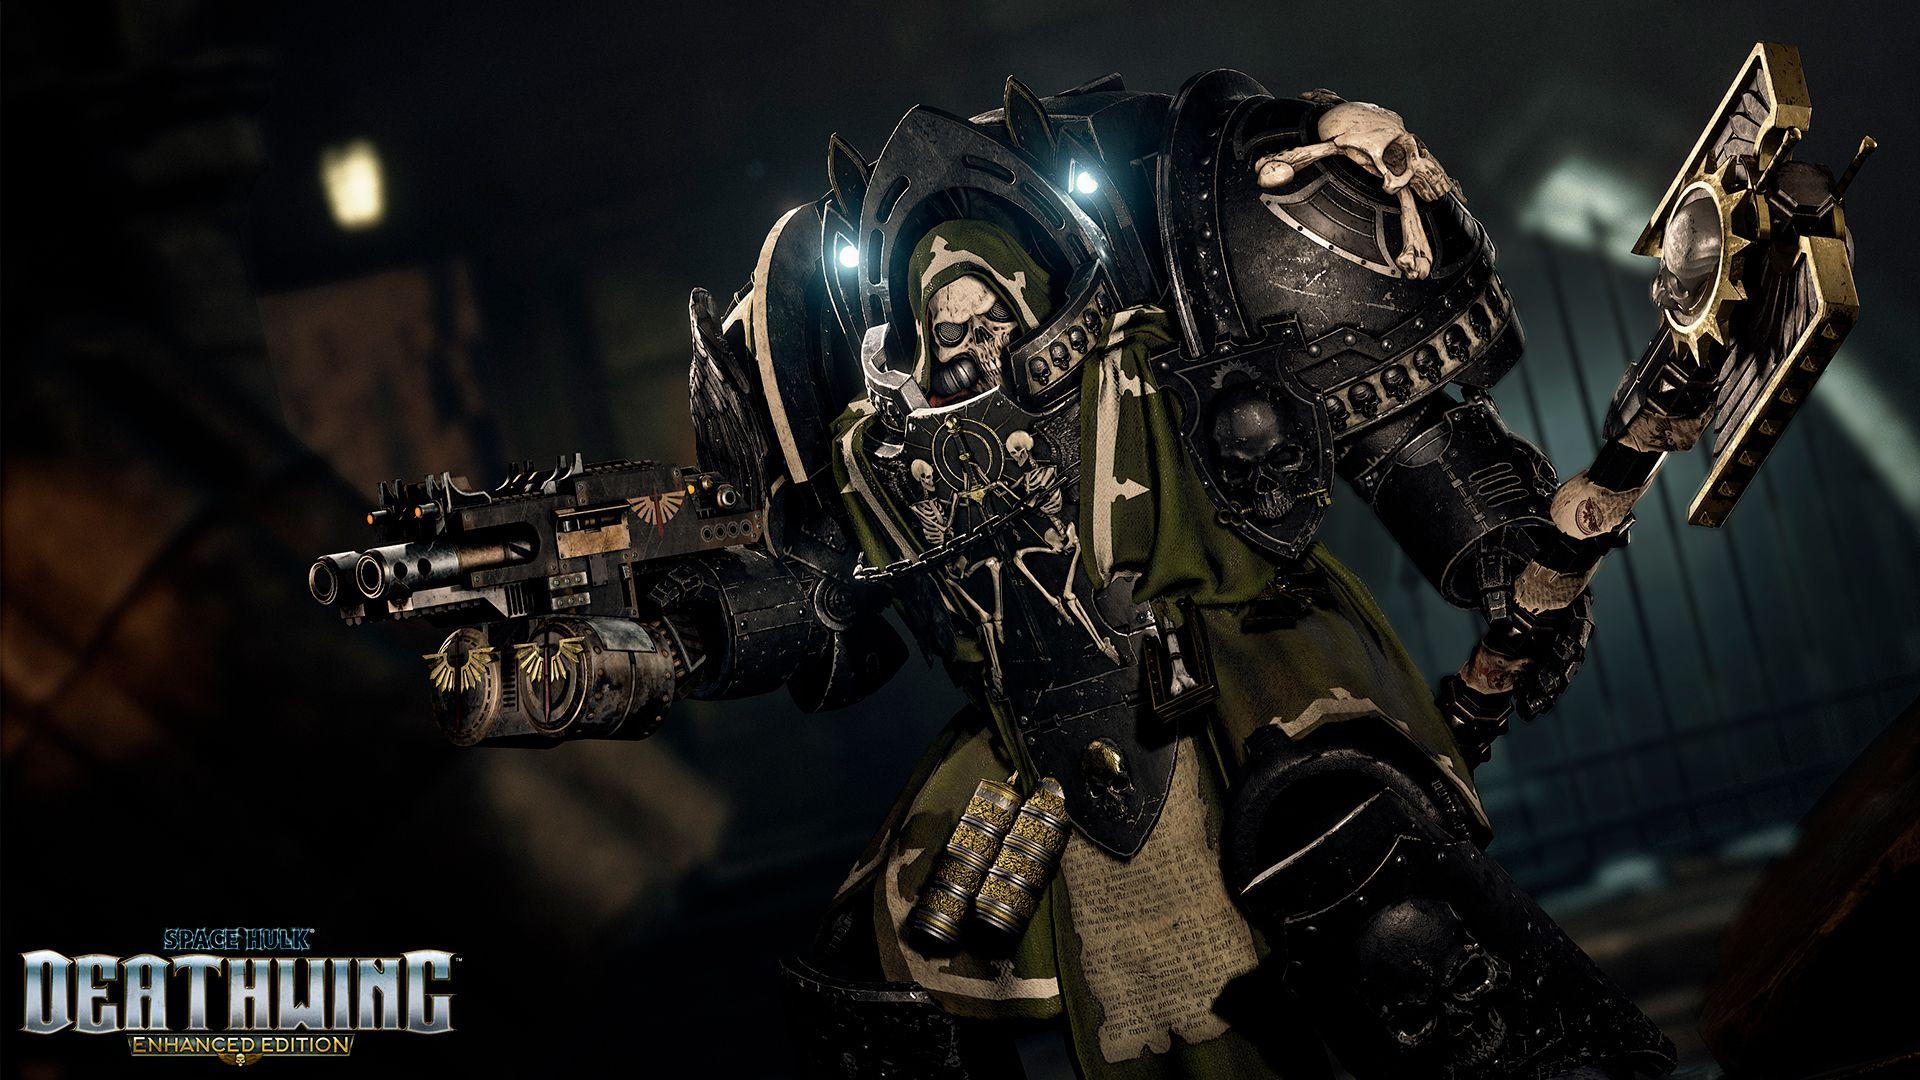 Space Hulk: Deathwing - A first glimpse at the Enhanced Edition!